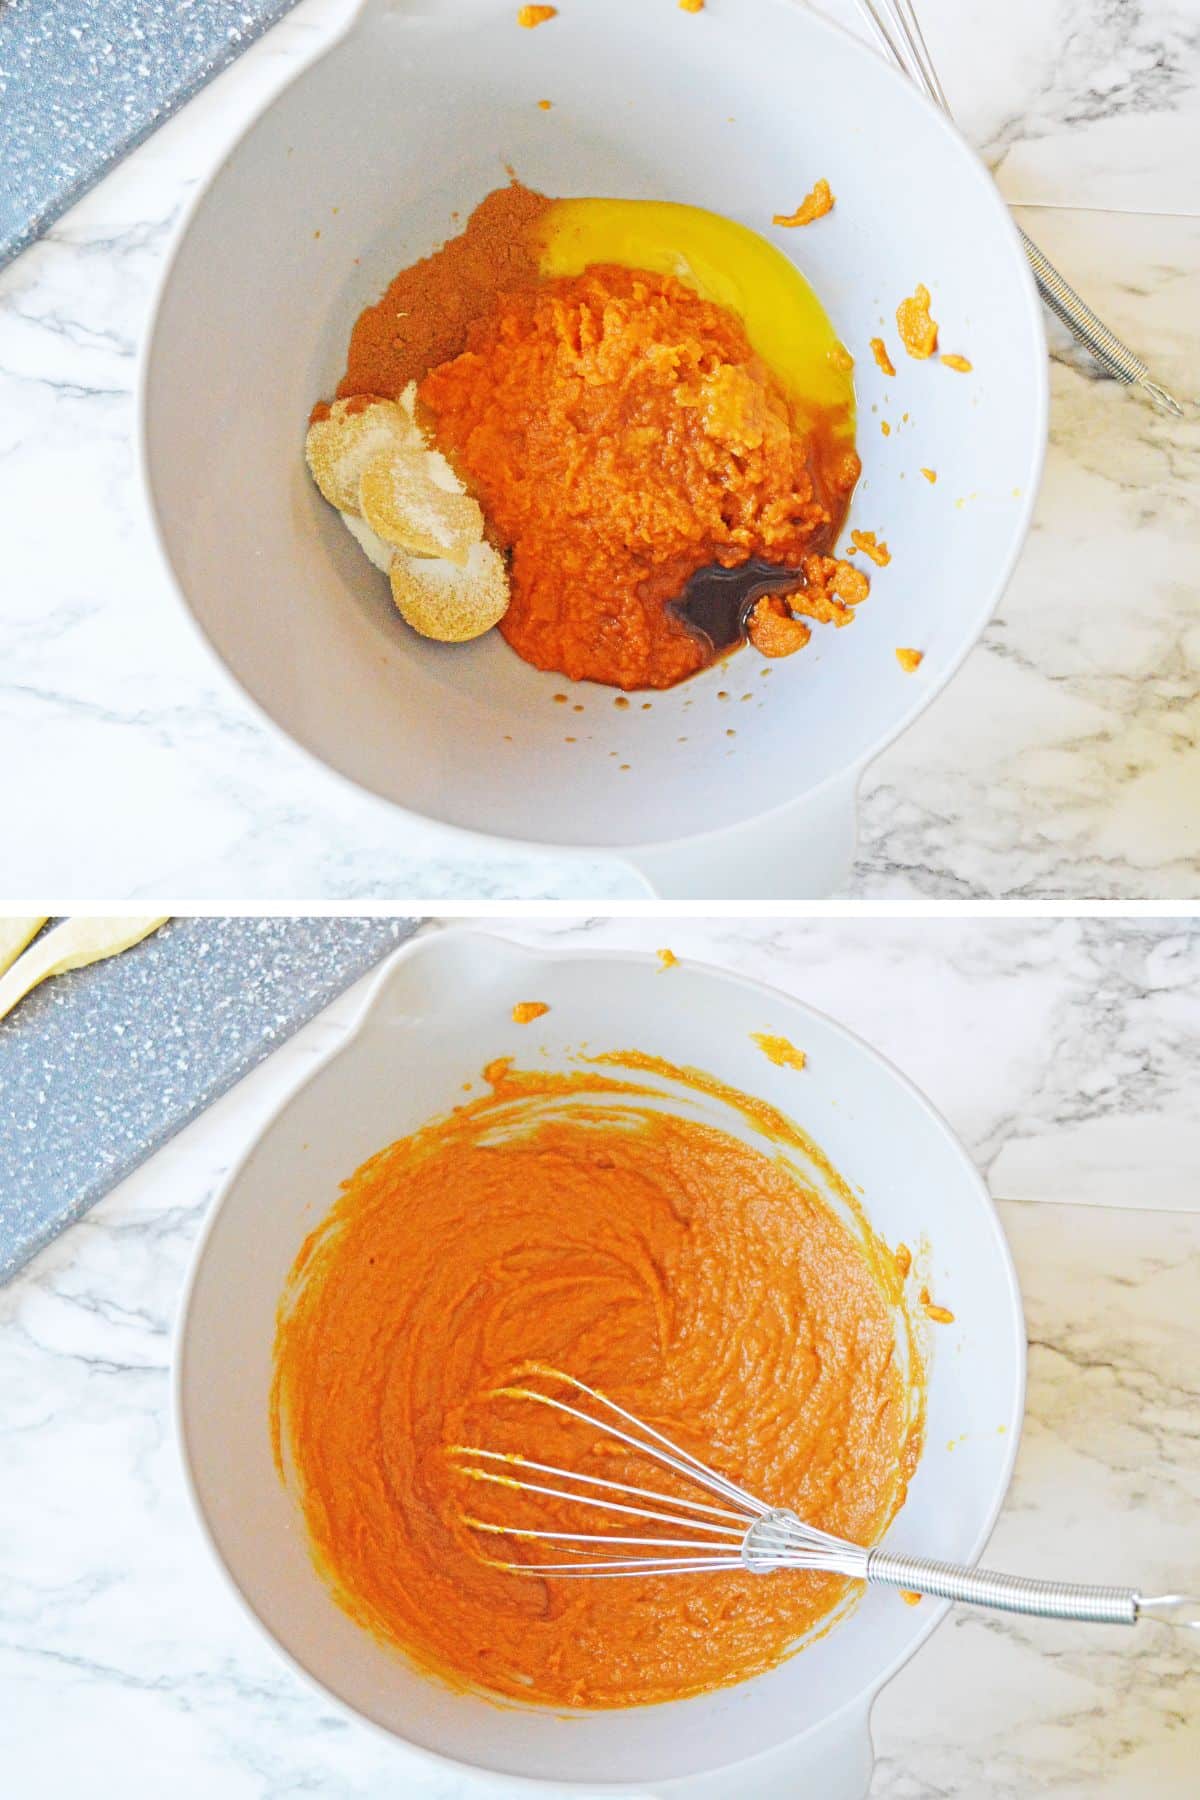 top photo: ingredients in mixing bowl. Bottom photo: ingredients mixed together to smooth orange mixture